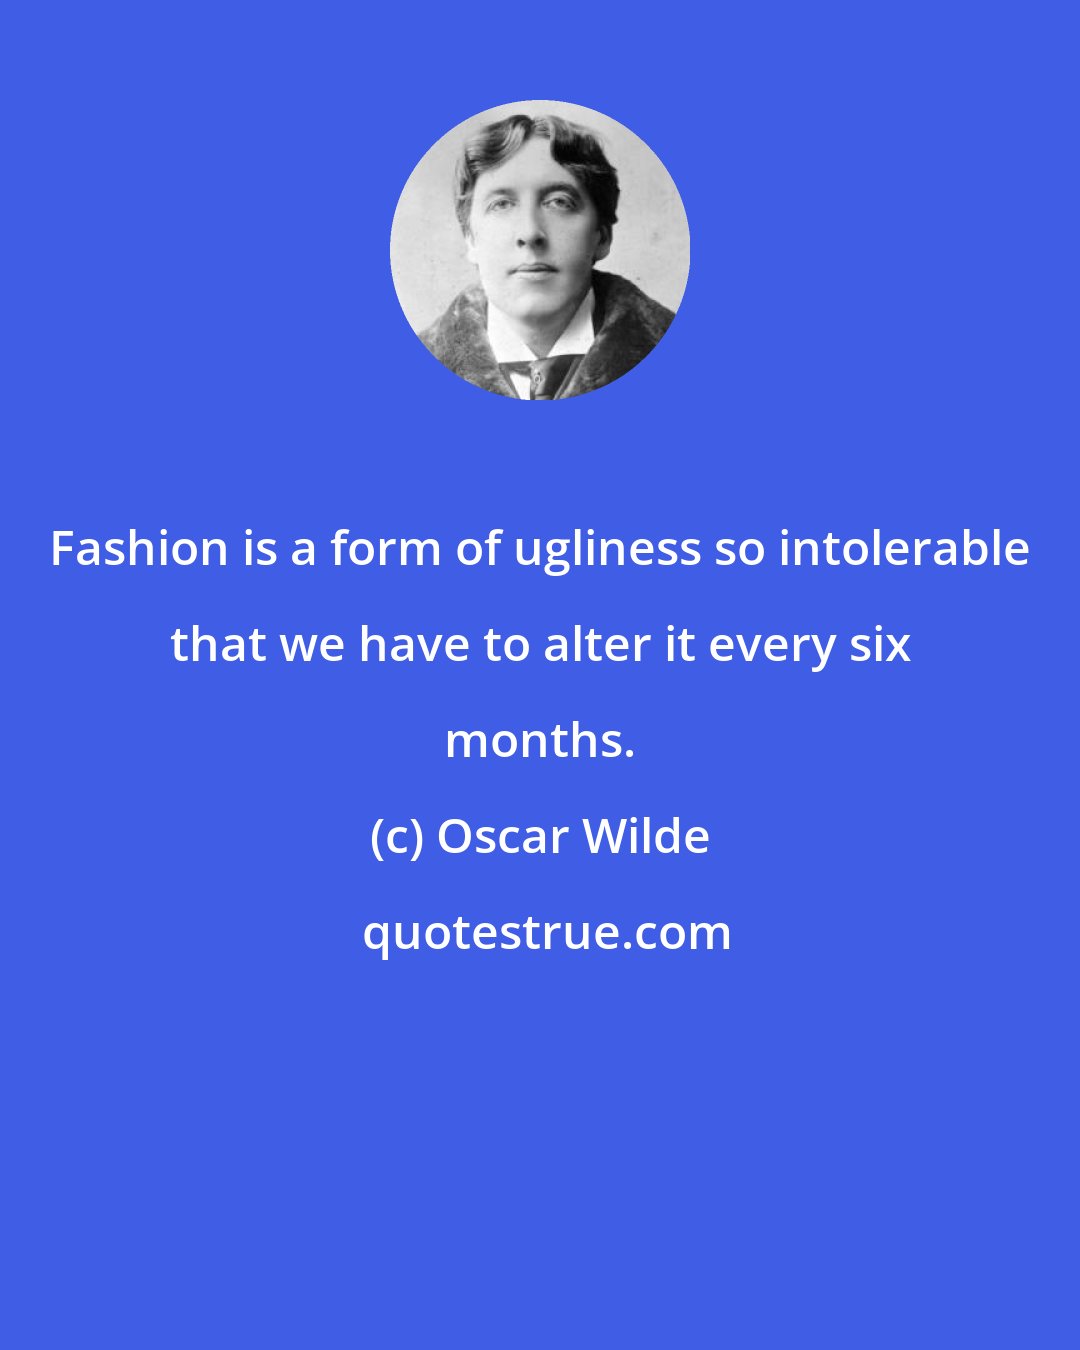 Oscar Wilde: Fashion is a form of ugliness so intolerable that we have to alter it every six months.